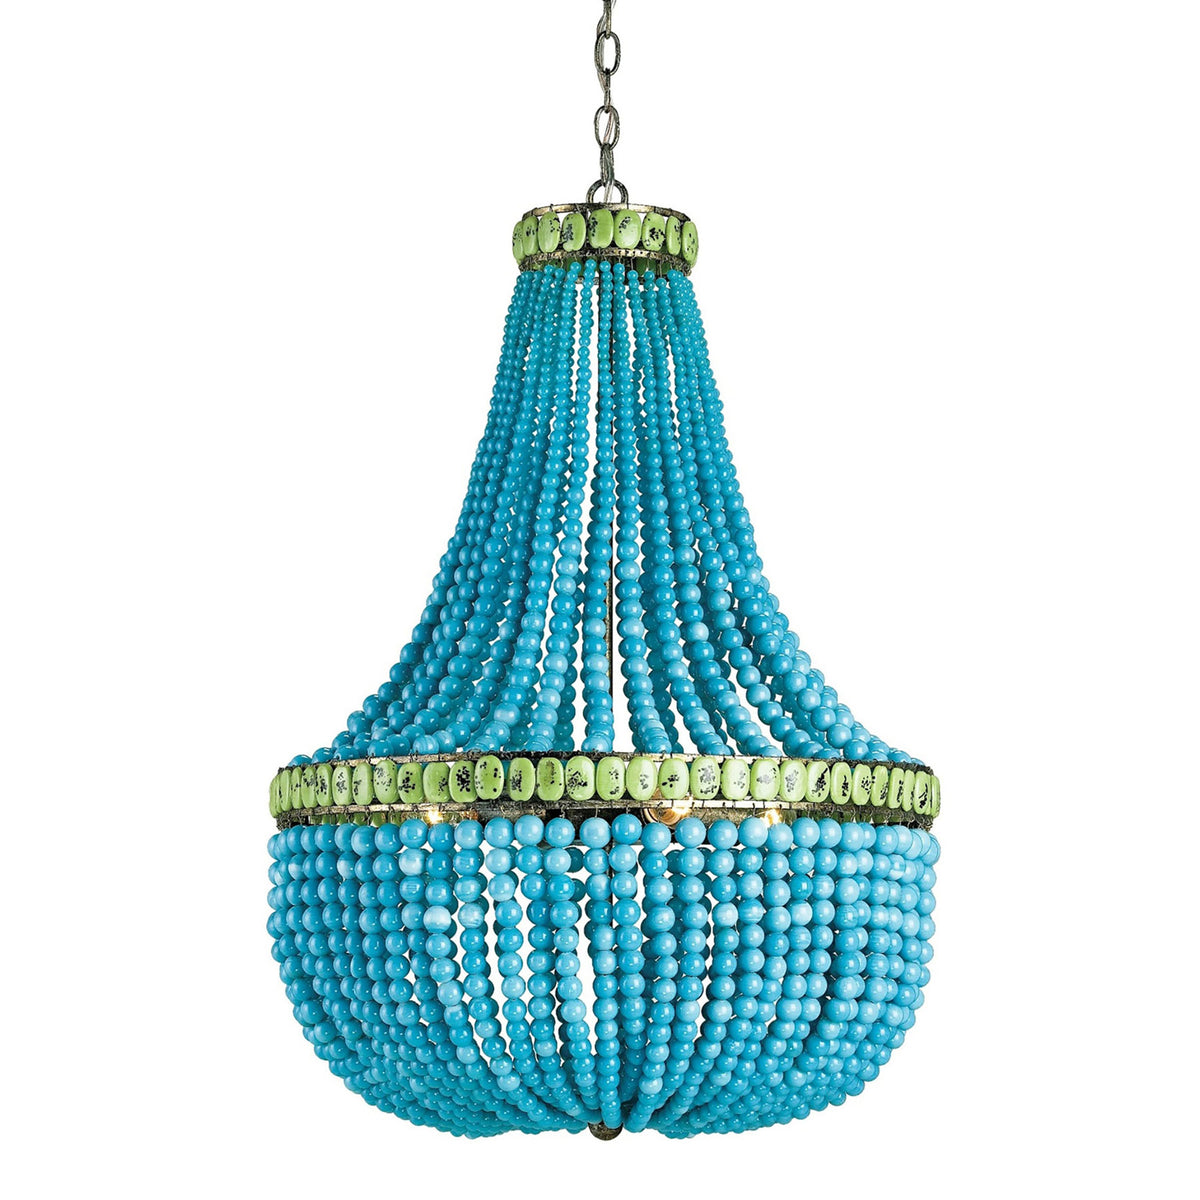 Hedy Turquoise Chandelier